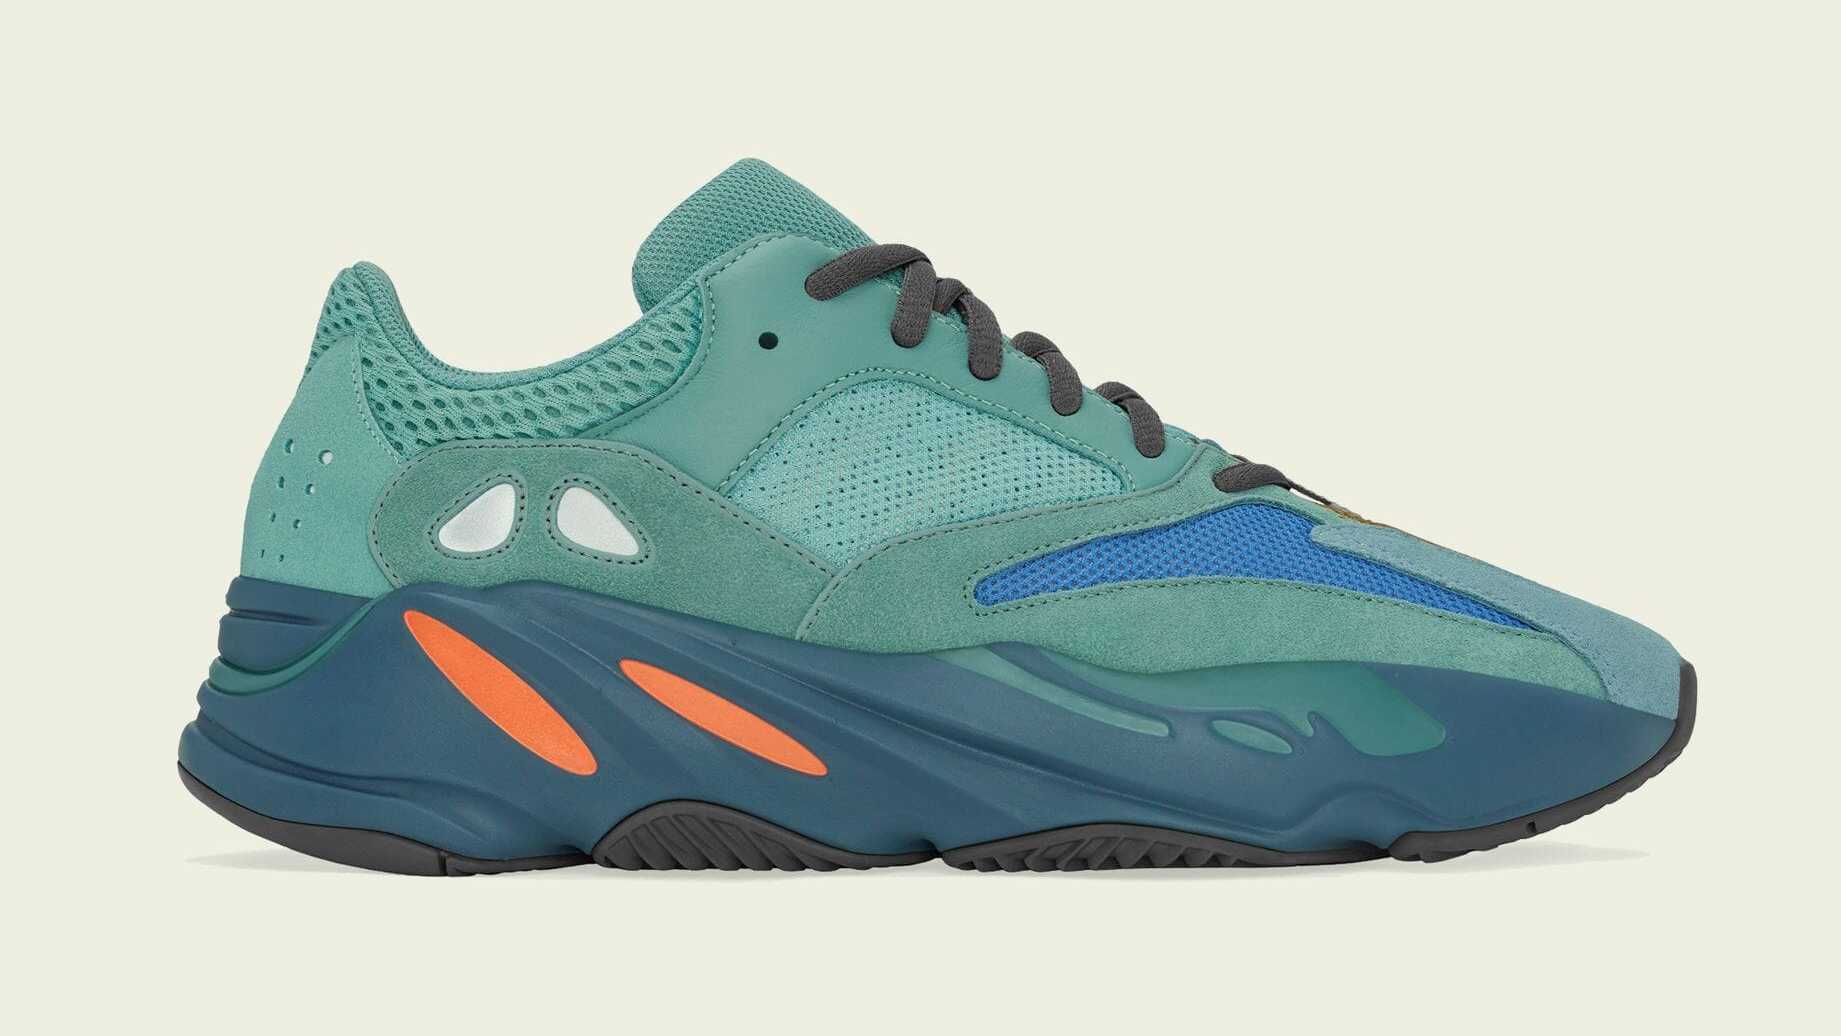 Adidas Yeezy Boost 700 &#x27;Faded Azure&#x27; GZ2002 Lateral